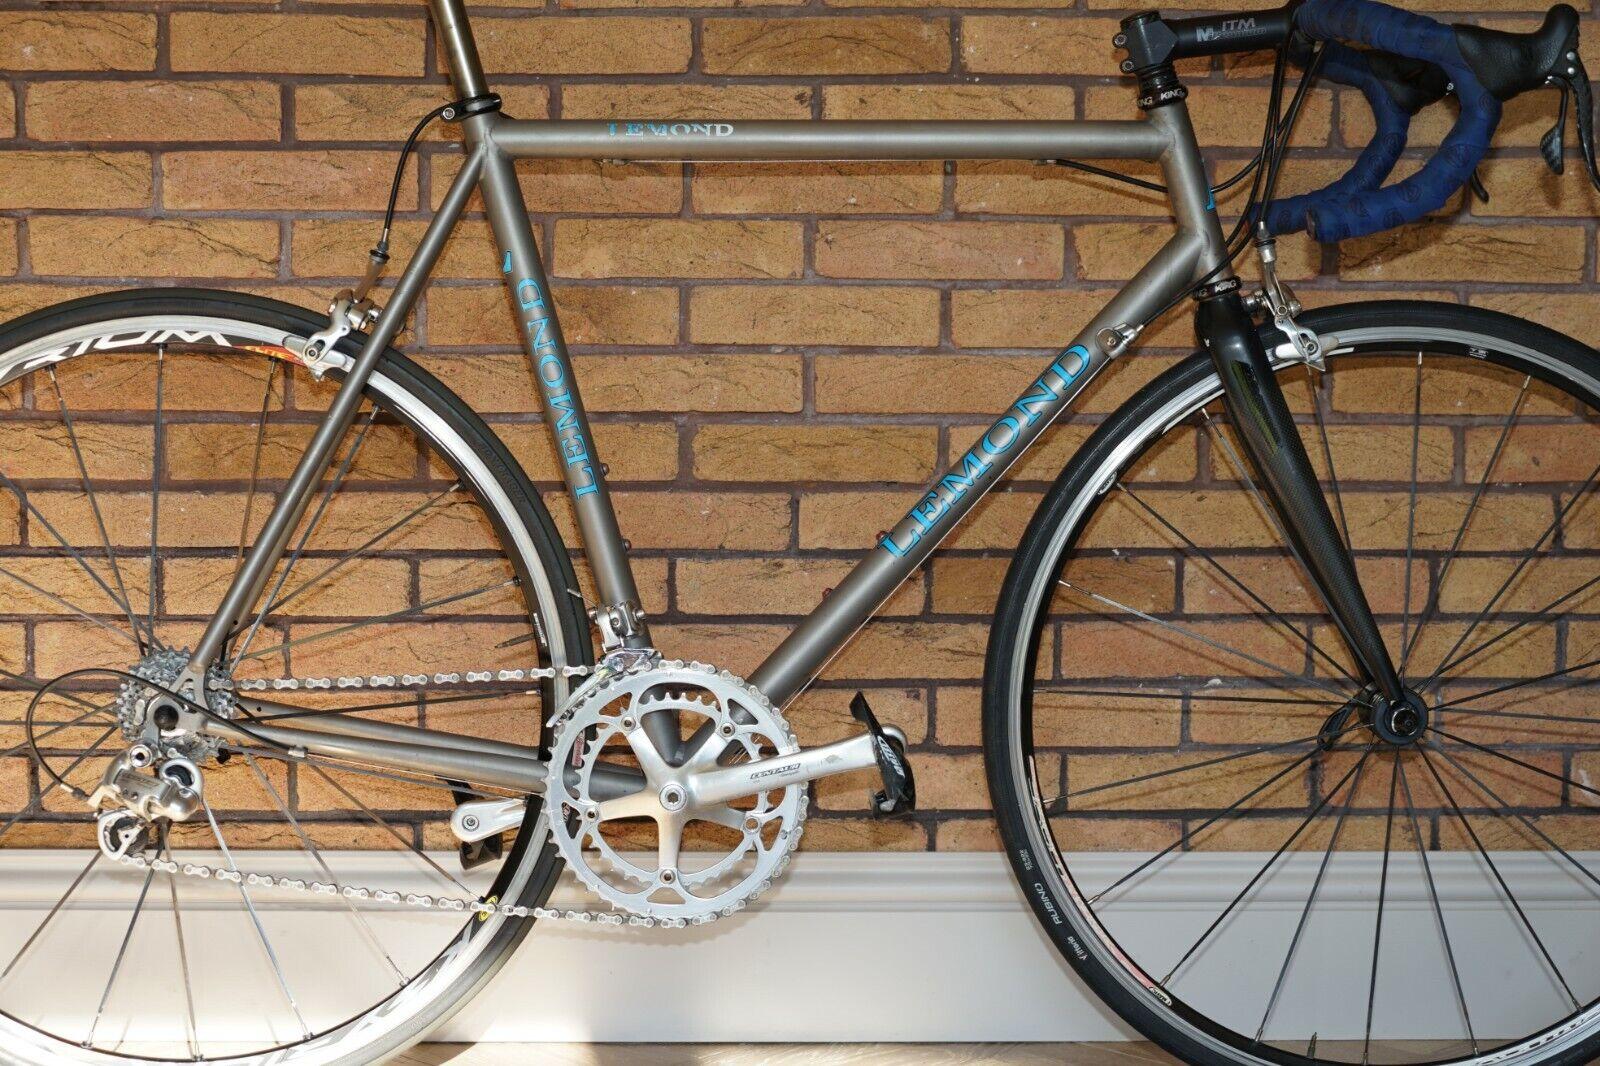 Royal house antiques.

Royal house antiques is delighted to offer for sale this very rare and collectable vintage Lemond 3AL-2.5V Titanium road bike with Chris King sealed bearing headset.

History

I am selling my entire bike collection which